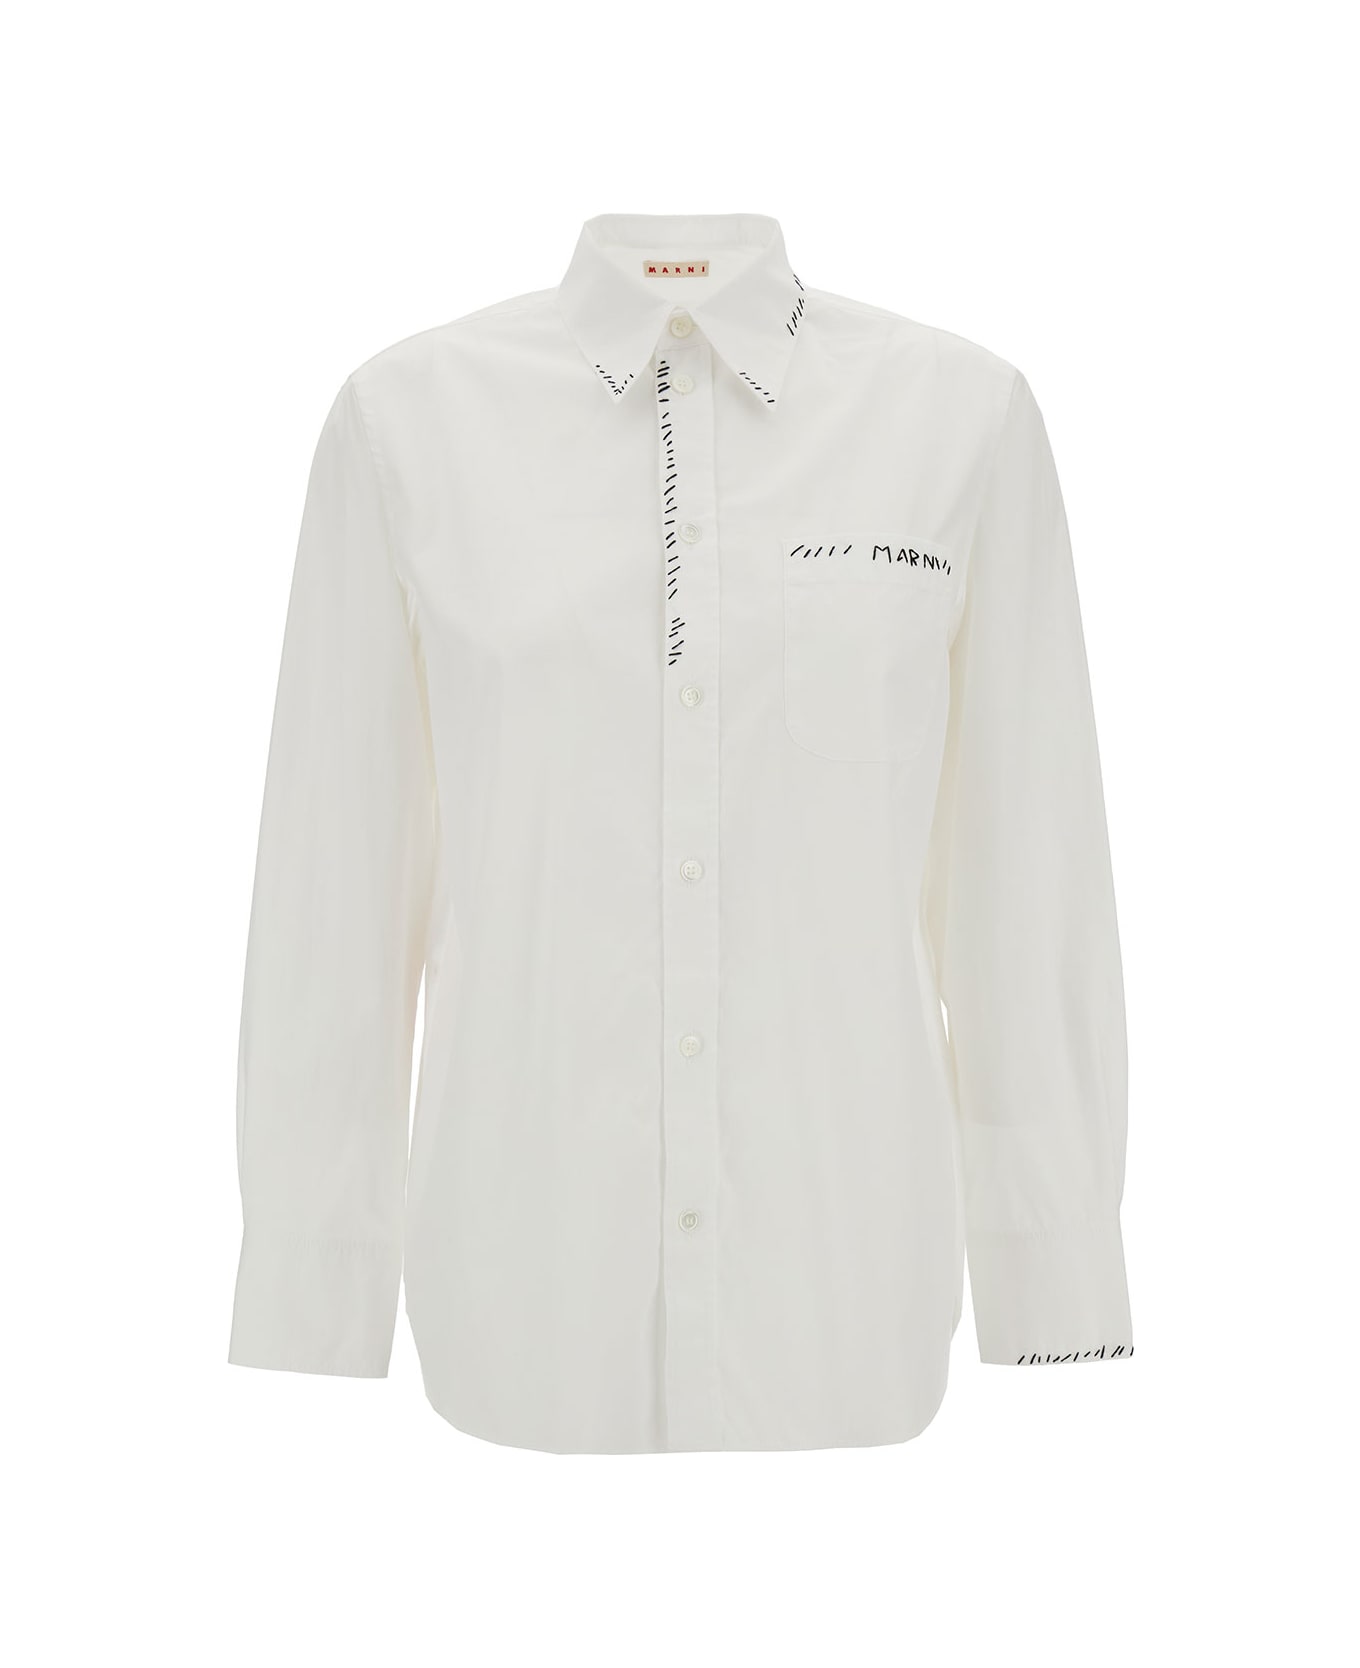 Marni Oversized White Shirt With Contrasting Logo Print In Cotton Woman - White